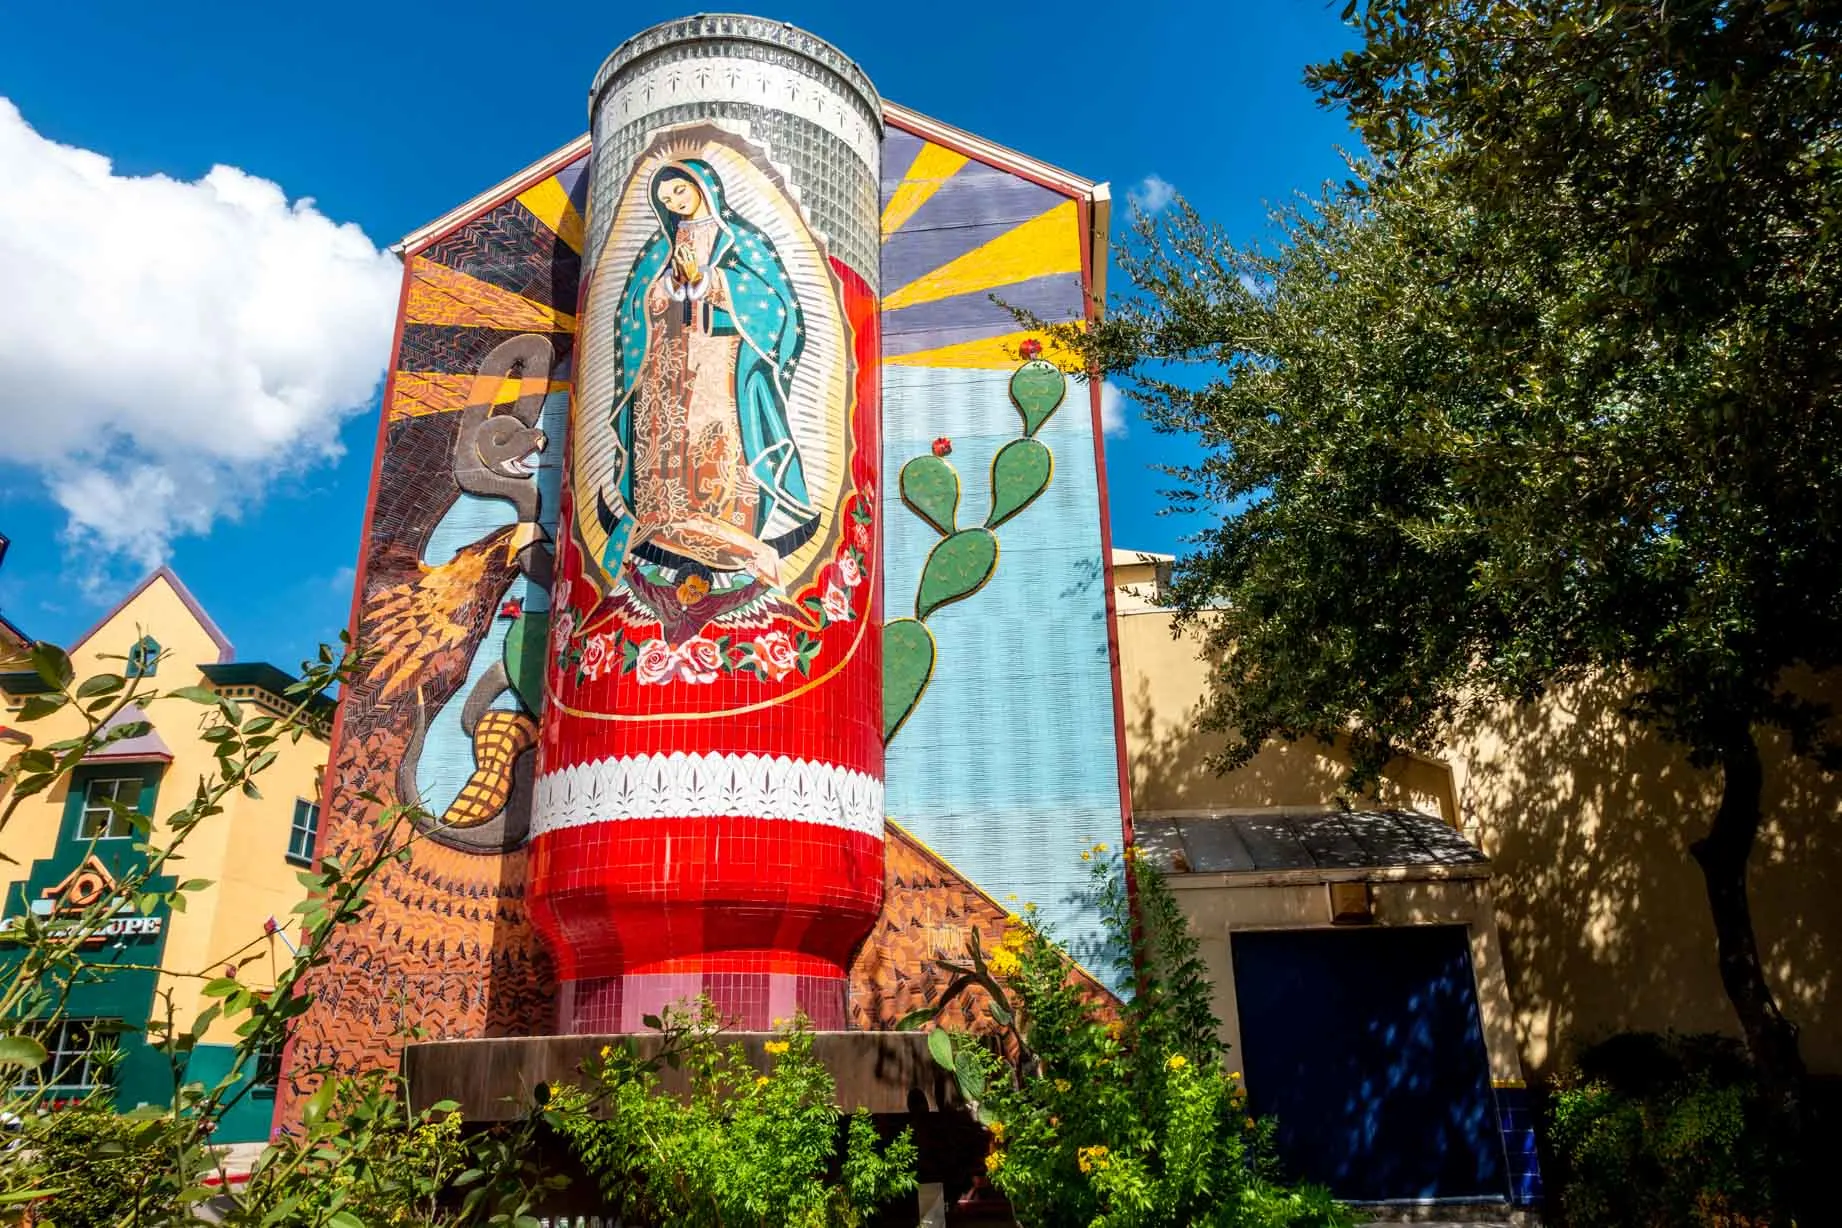 Giant Catholic prayer candle with the image of the Virgin Mary